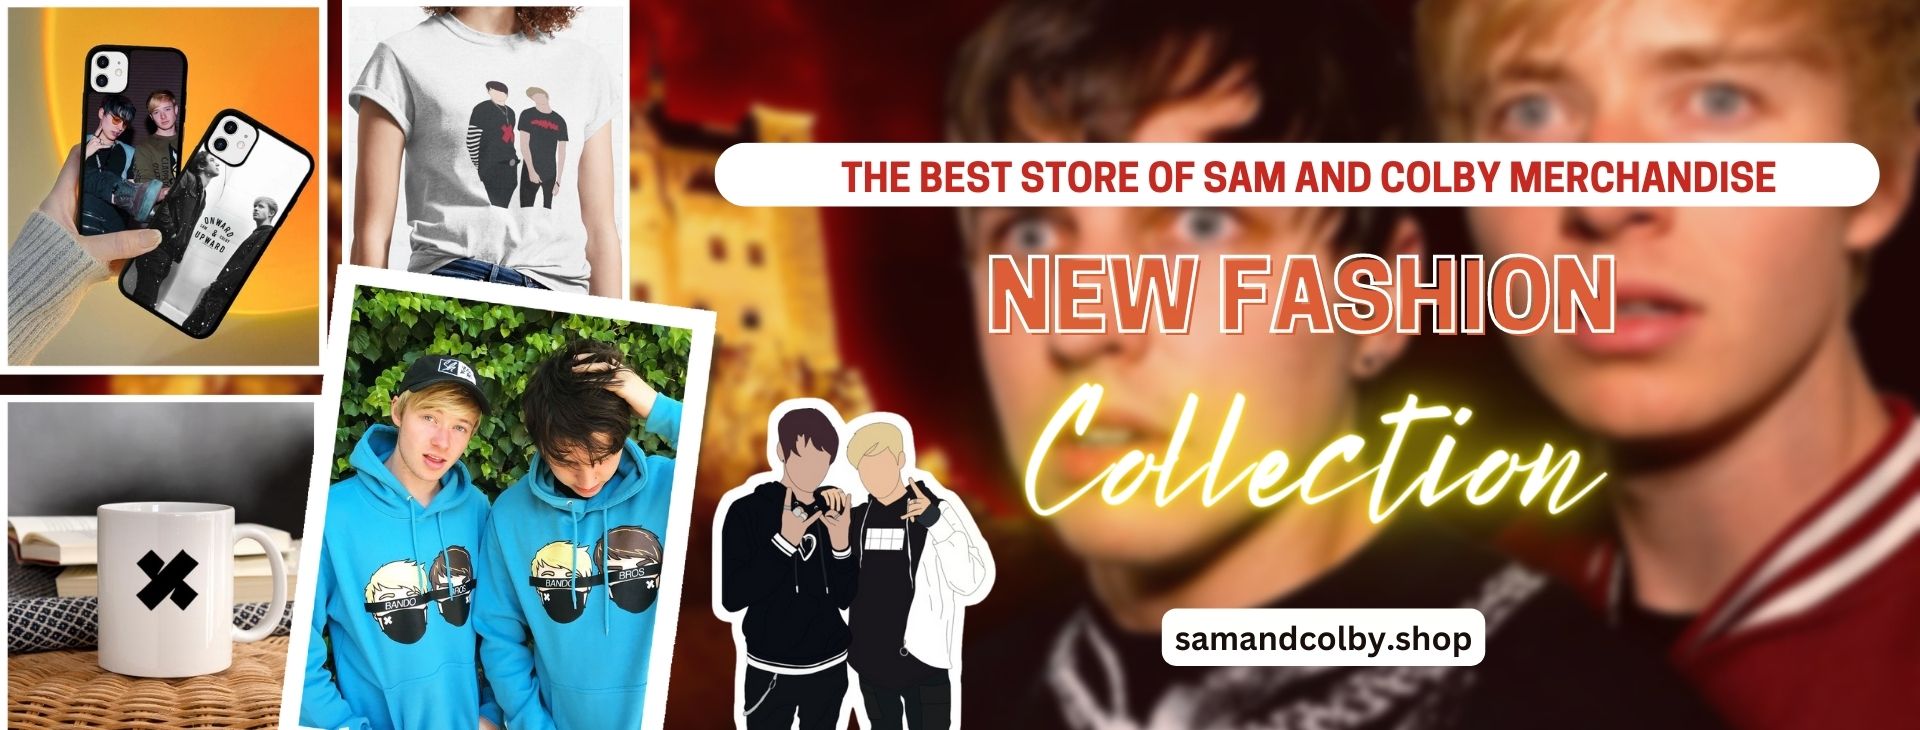 no edit sam and colby banner - Sam And Colby Merch